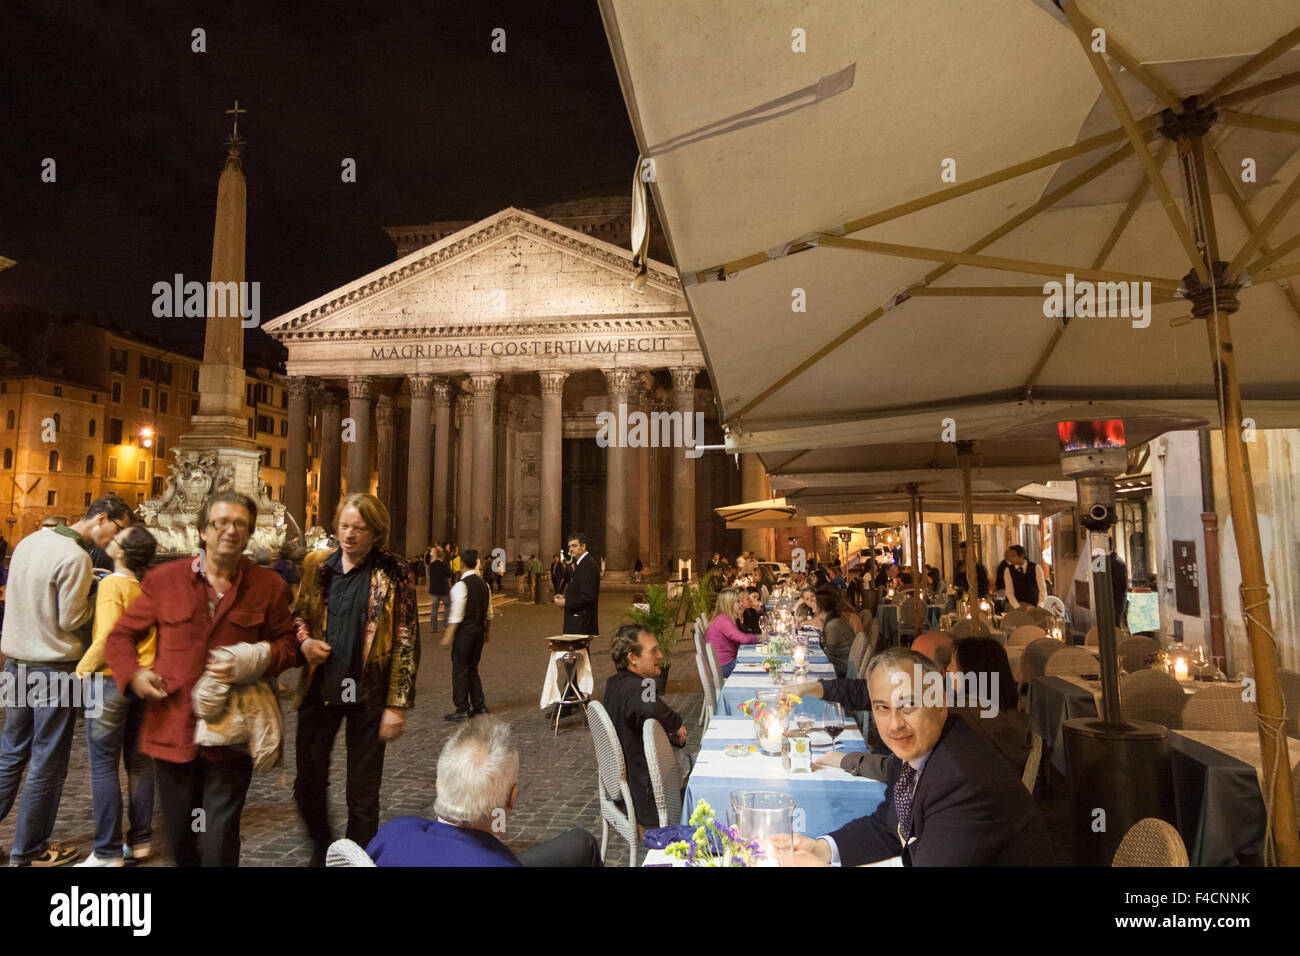 Alfresco dinning on Piazza della Rotonda with Pantheon in background, Rome, Italy Stock Photo